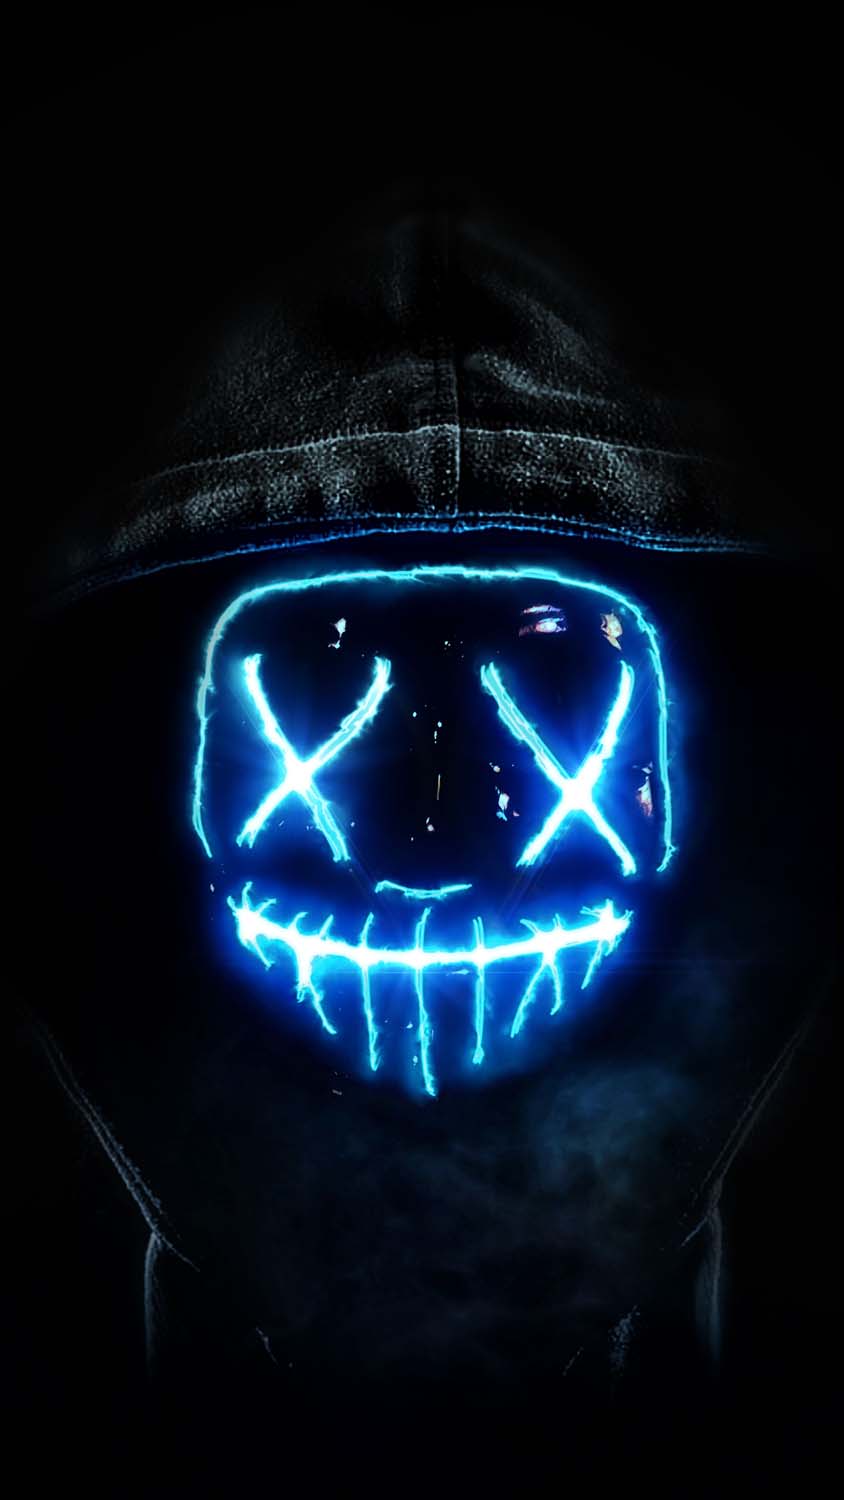 Neon Stitched Mask iPhone Wallpaper HD